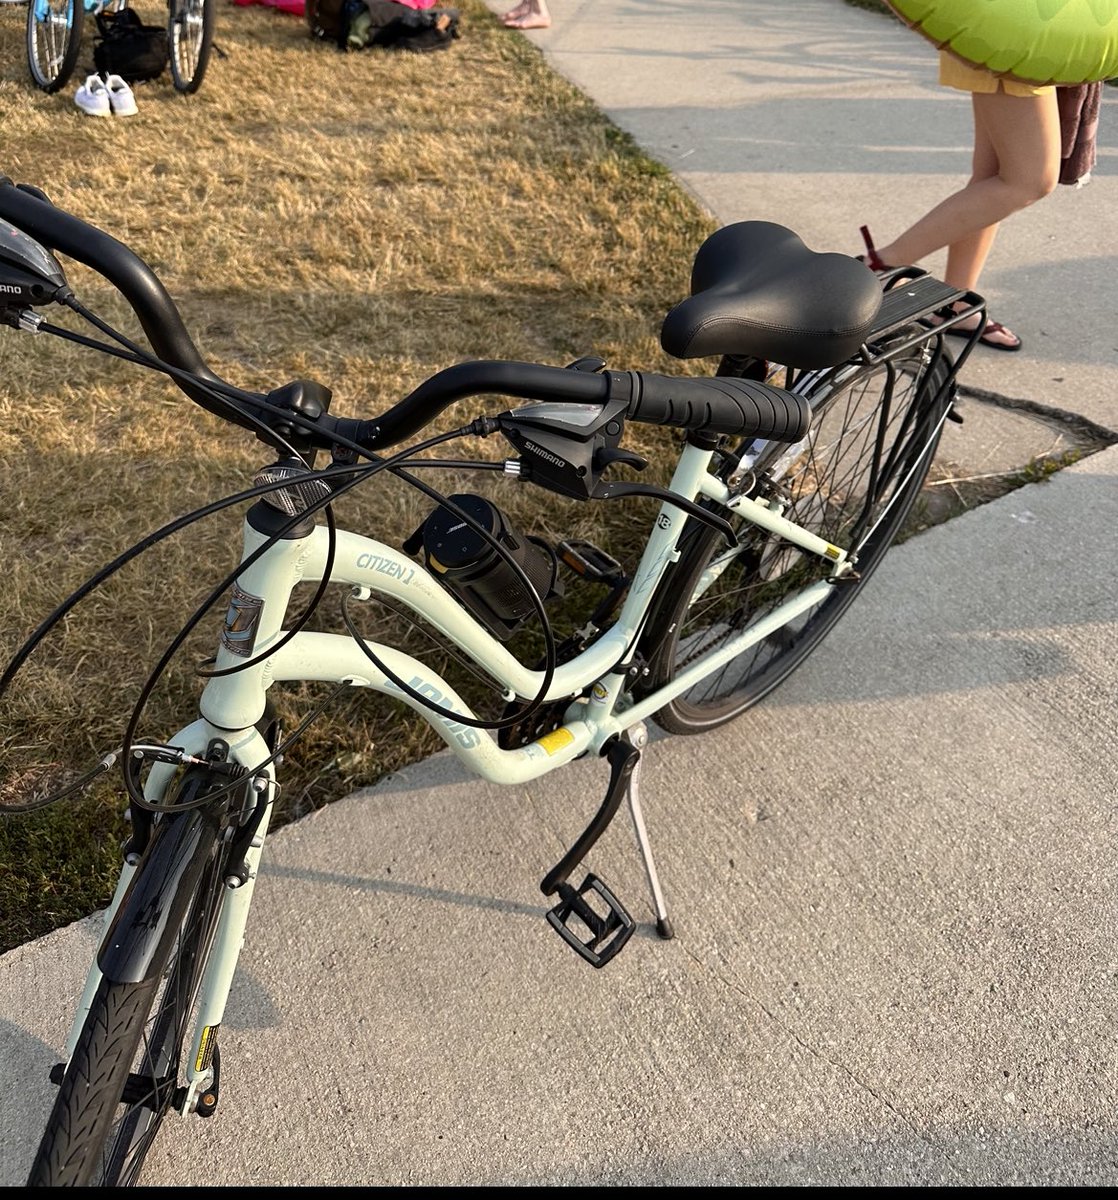 Hey #bikechi my roommates light blue Jamis bike was stolen from our locked & gated backyard last night. There is also a basket attached to the front on the long shot someone sees this bike around Chicago